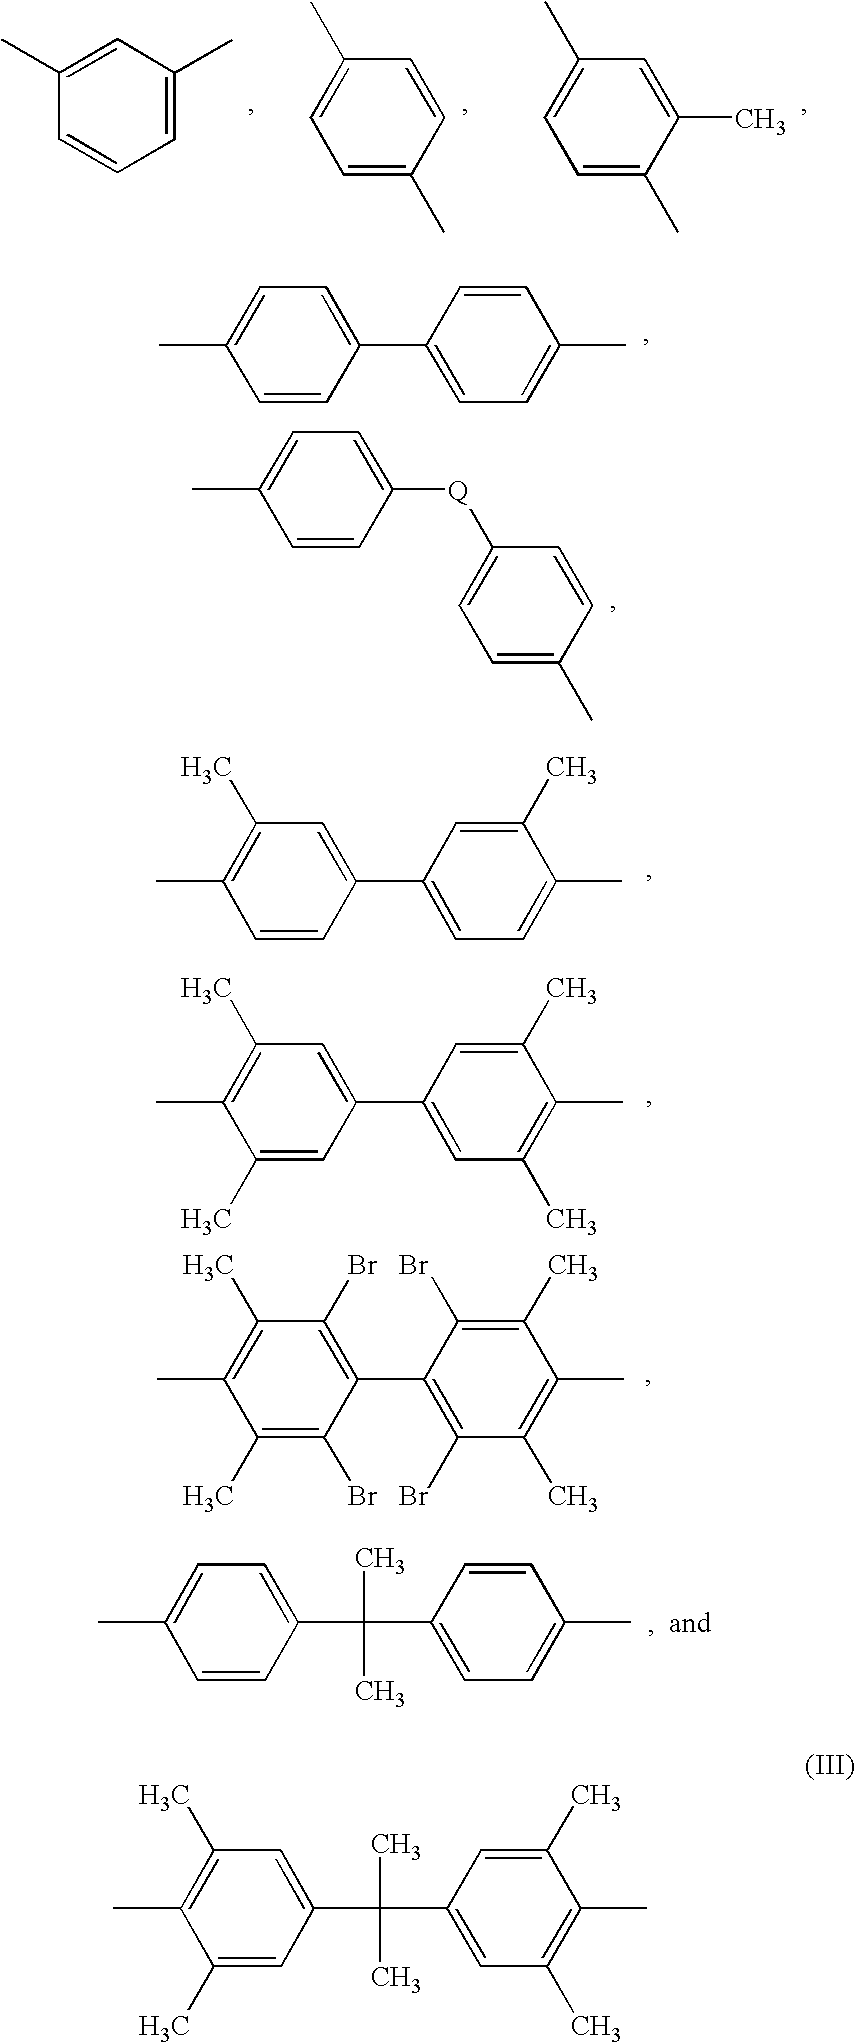 Preparation of polyimide polymers